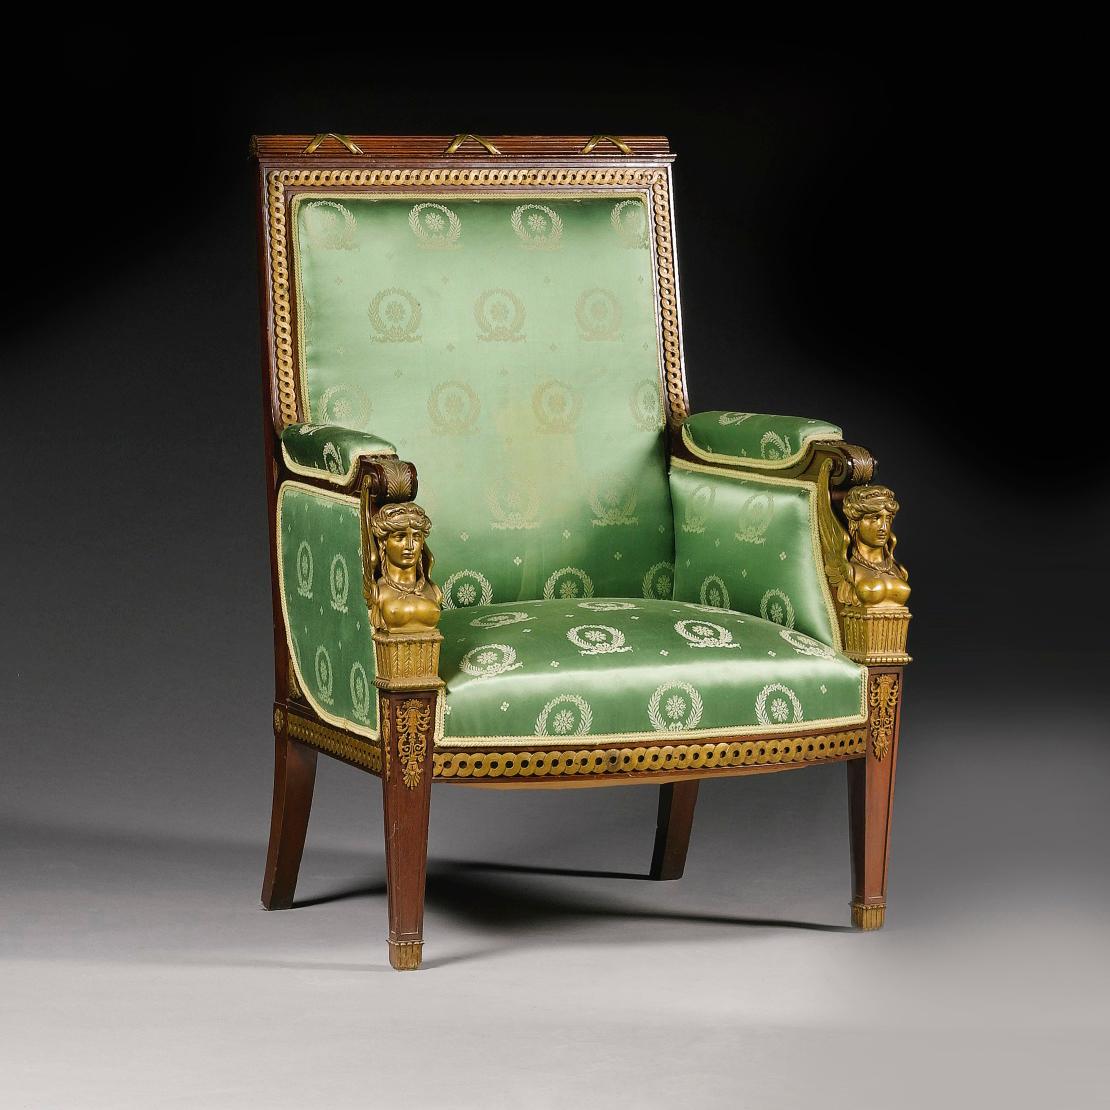 A Fine Pair of Mahogany And Gilt-Bronze Bergères in the Manner of Jacob-Desmalter. The Bergères each having armrests headed by finely cast caryatid herms.     

French, Circa 1880.

François-Honoré-Georges Jacob-Desmalter (1770-1841) was Napoléon’s